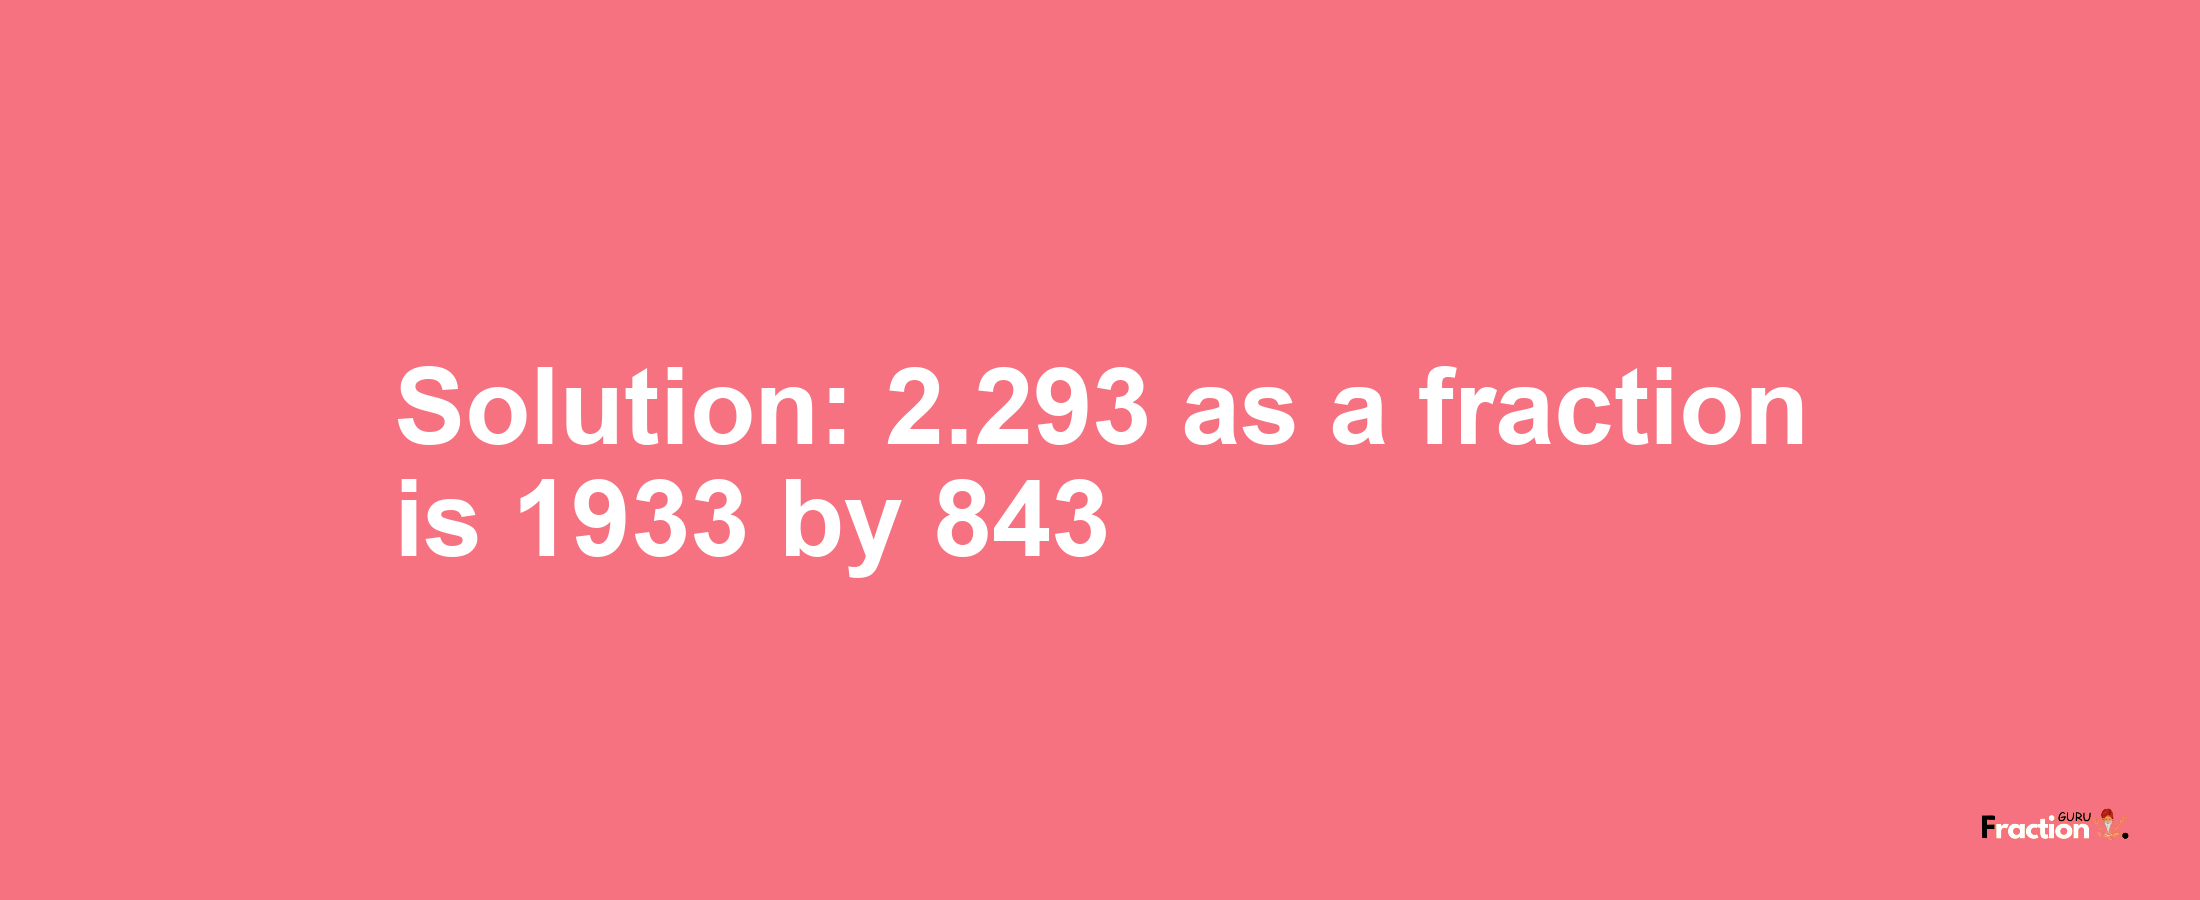 Solution:2.293 as a fraction is 1933/843